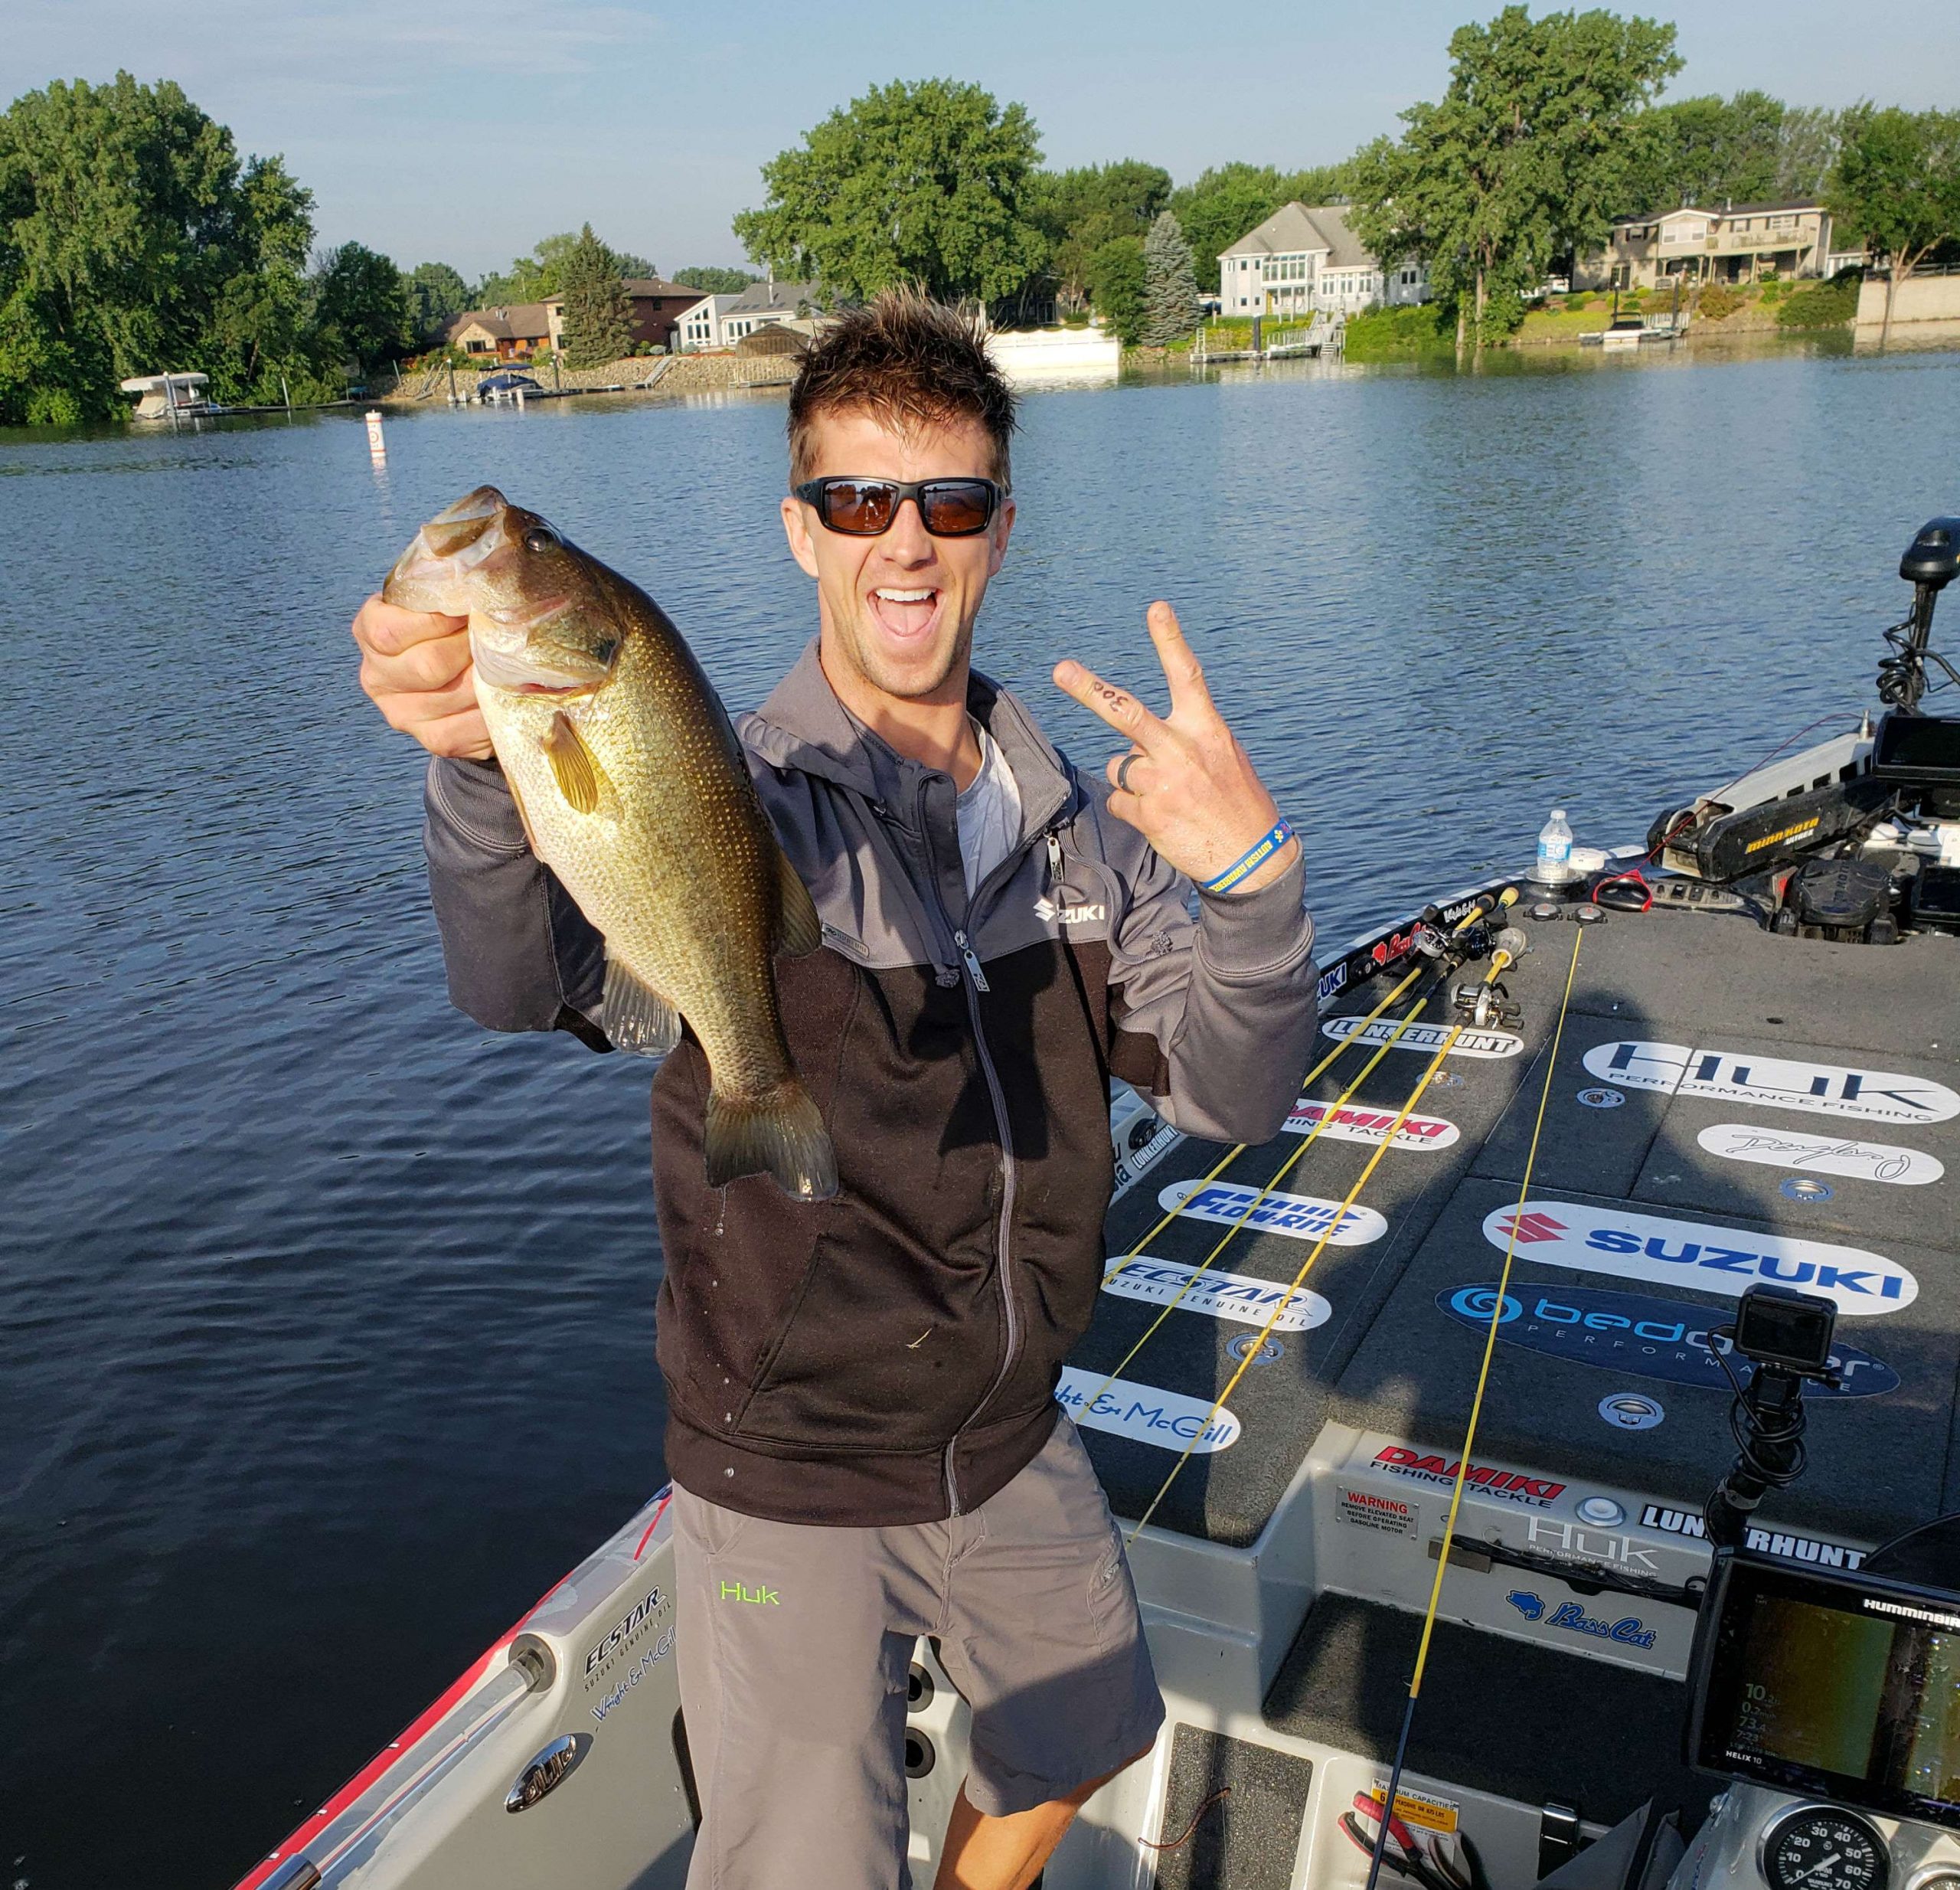 Chad Pipkens puts his second bass in the boat.